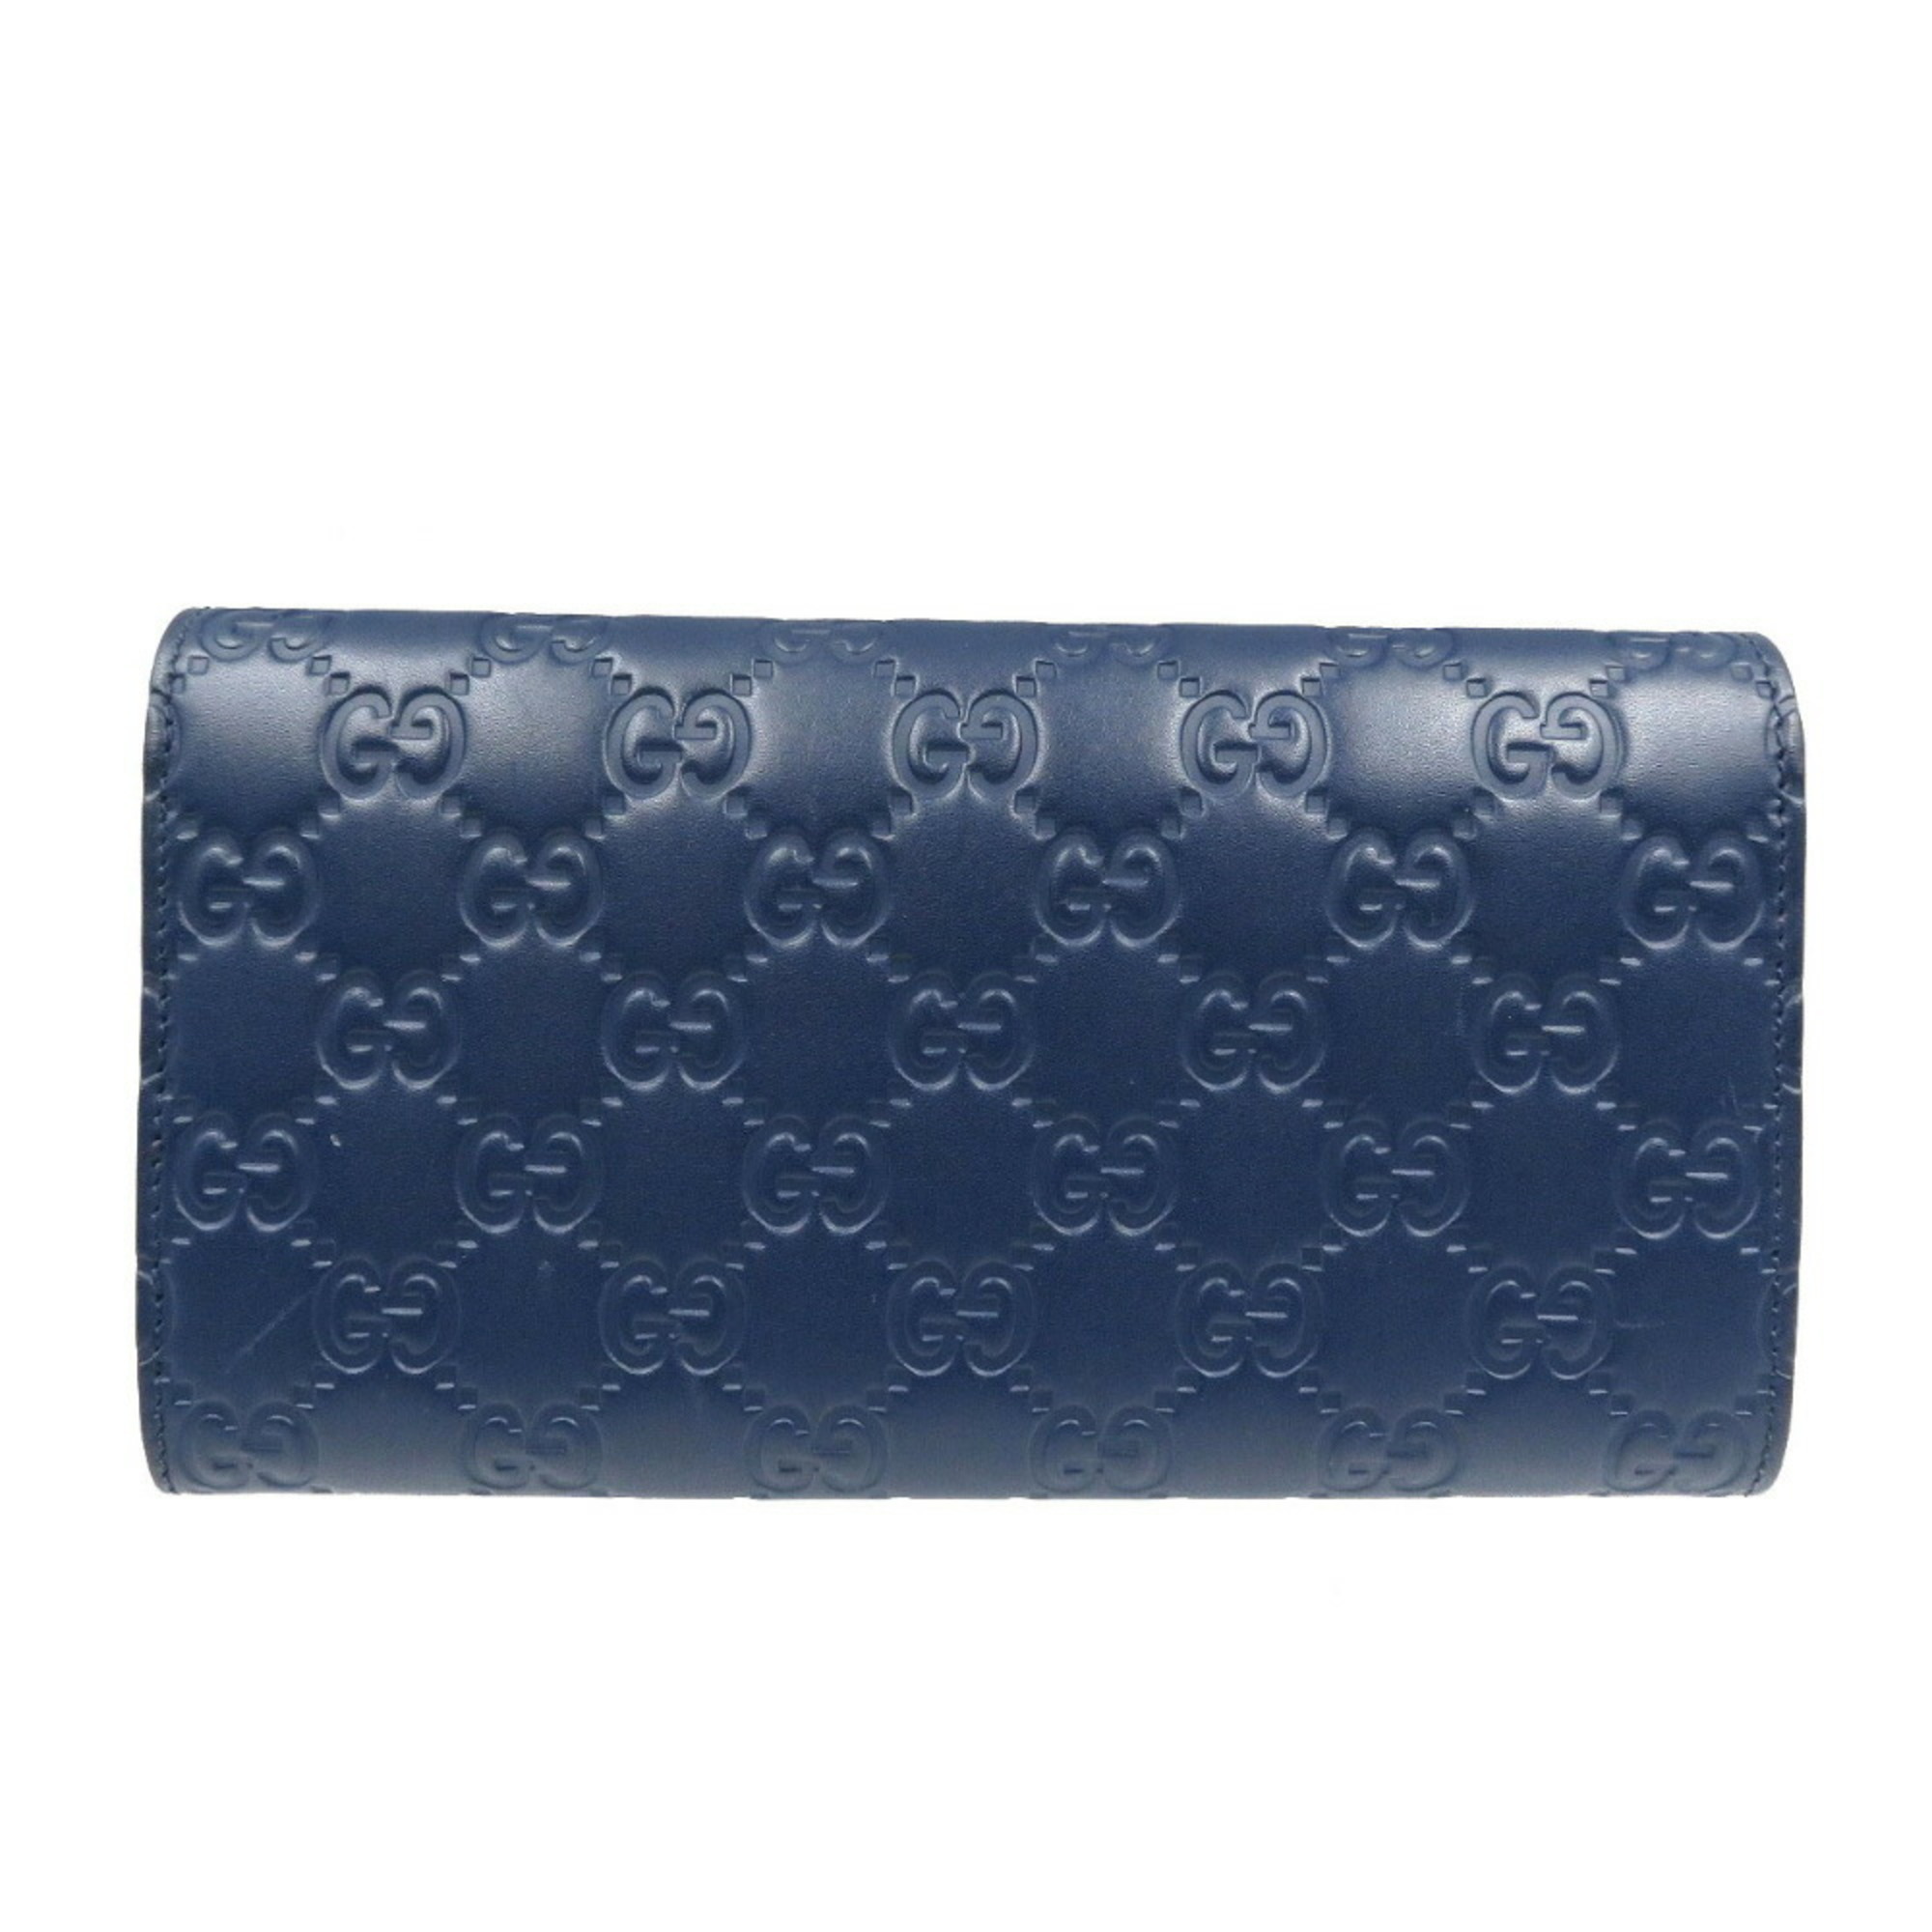 Gucci Guccisima Leather Navy Bifold Long Wallet GUCCI